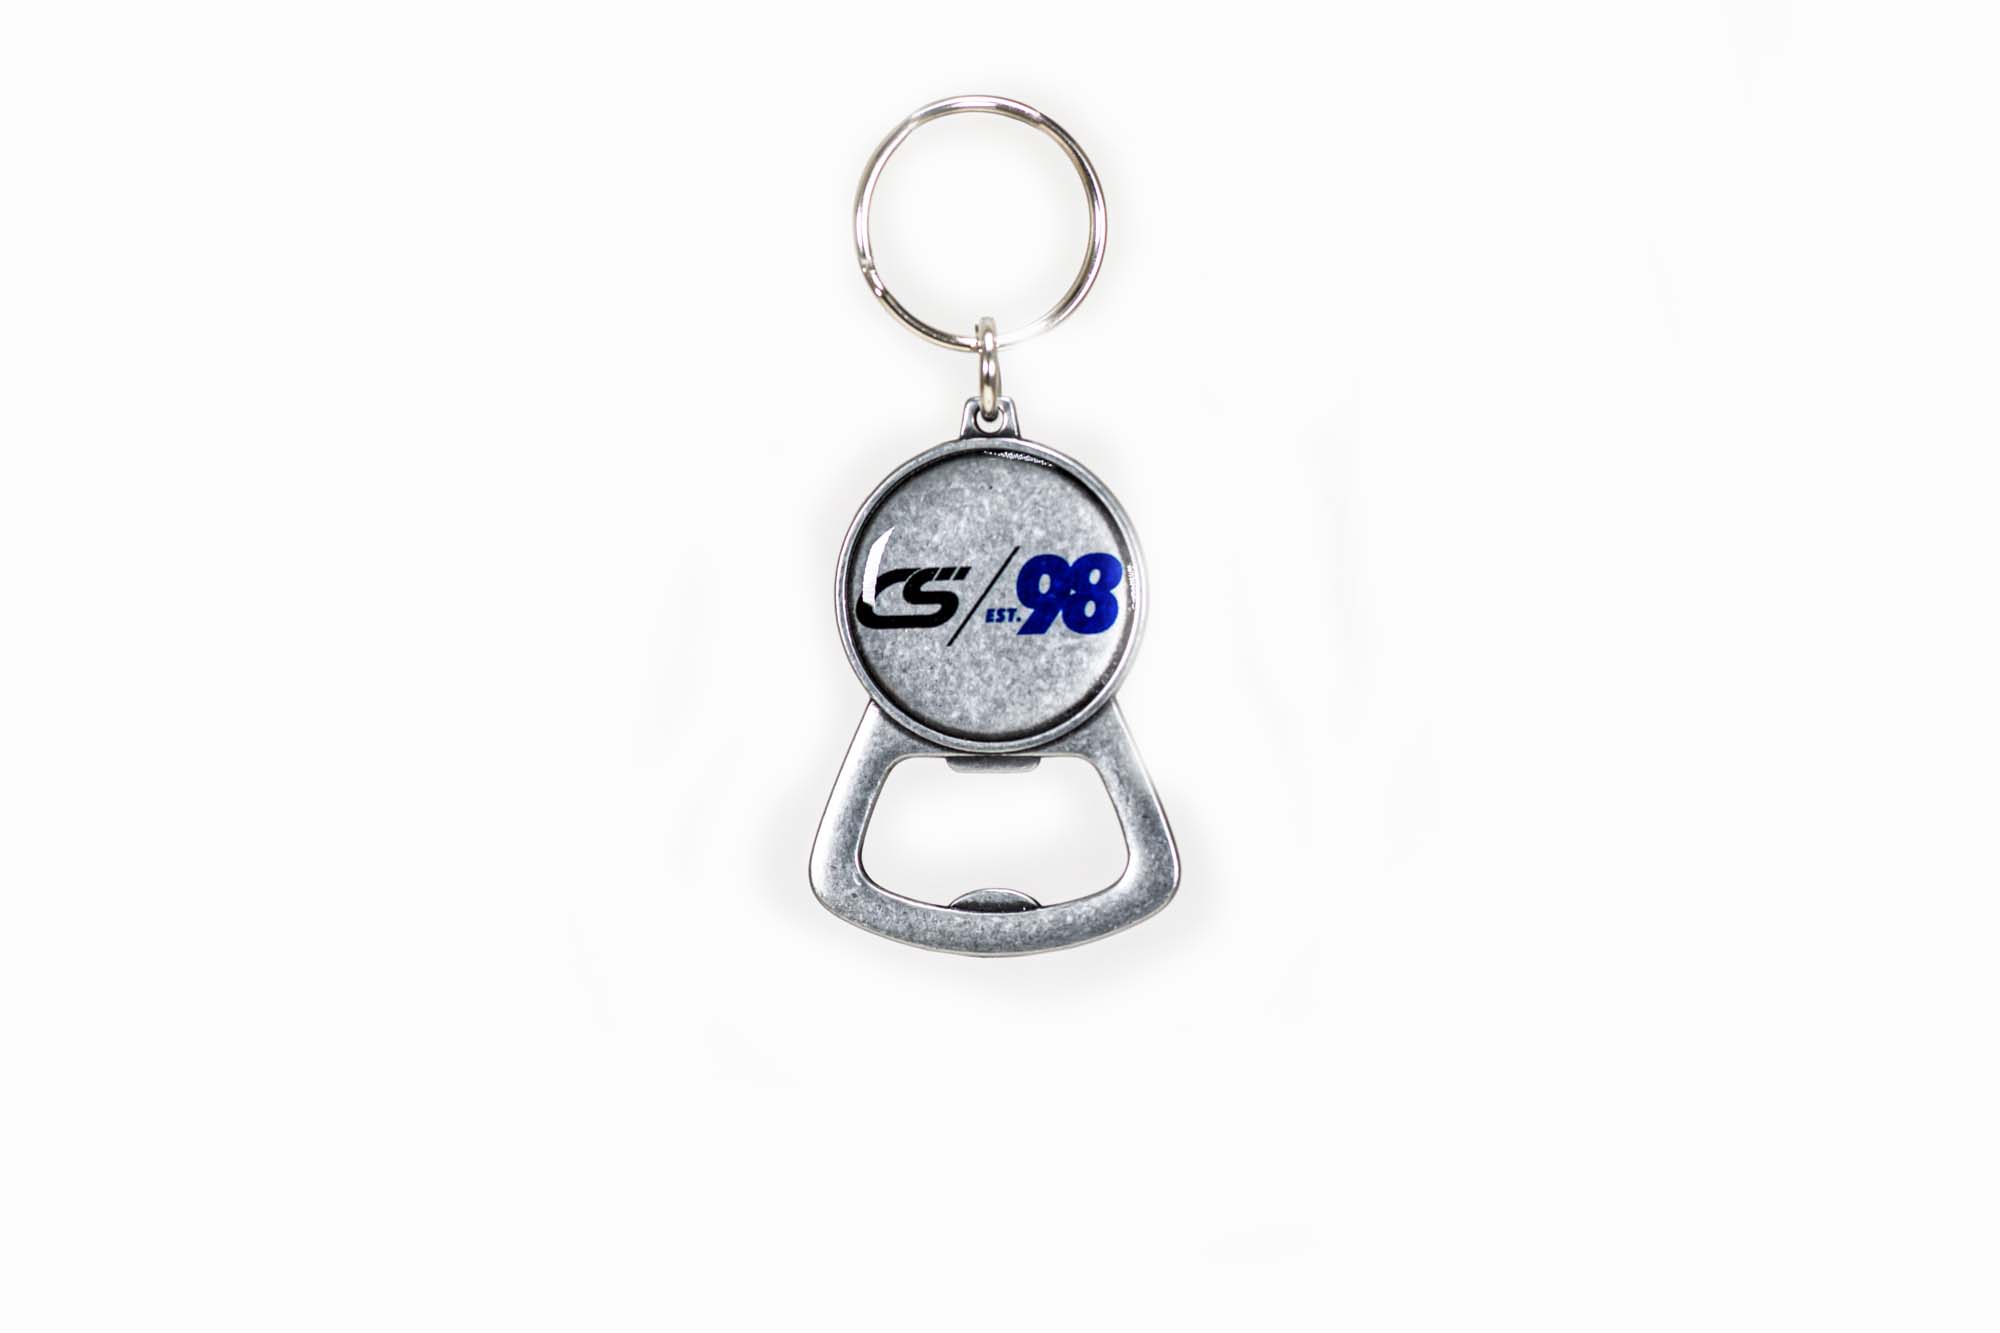 Mazda Performance Leader since 1998, now in keychain form!